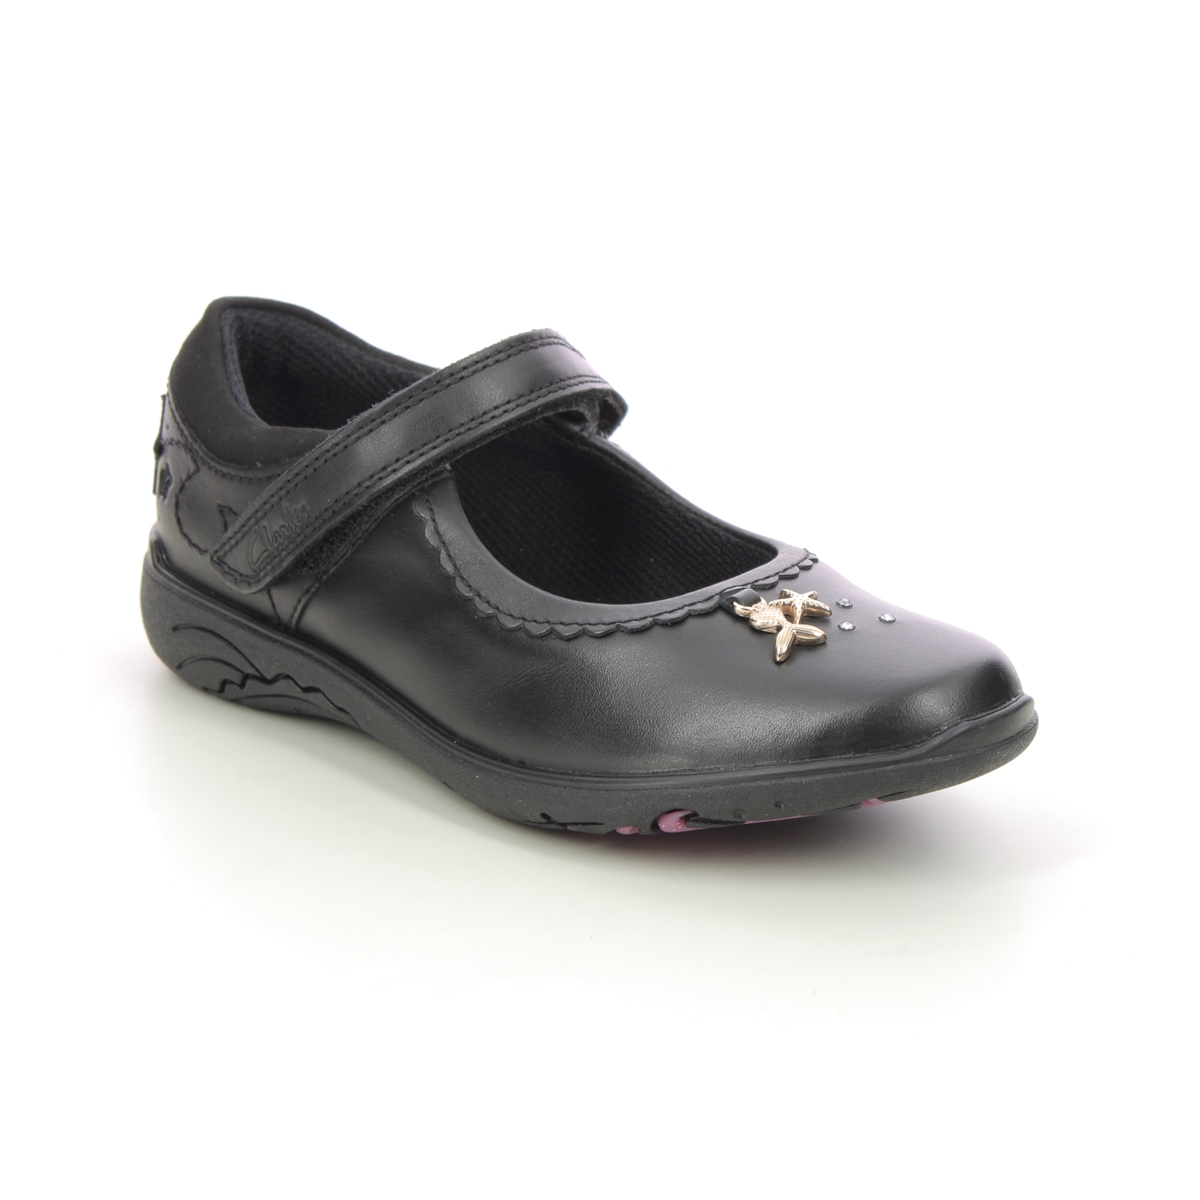 Clarks Relda Sea K Mary Jane Black leather Kids girls school shoes 7224-05E in a Plain Leather in Size 2